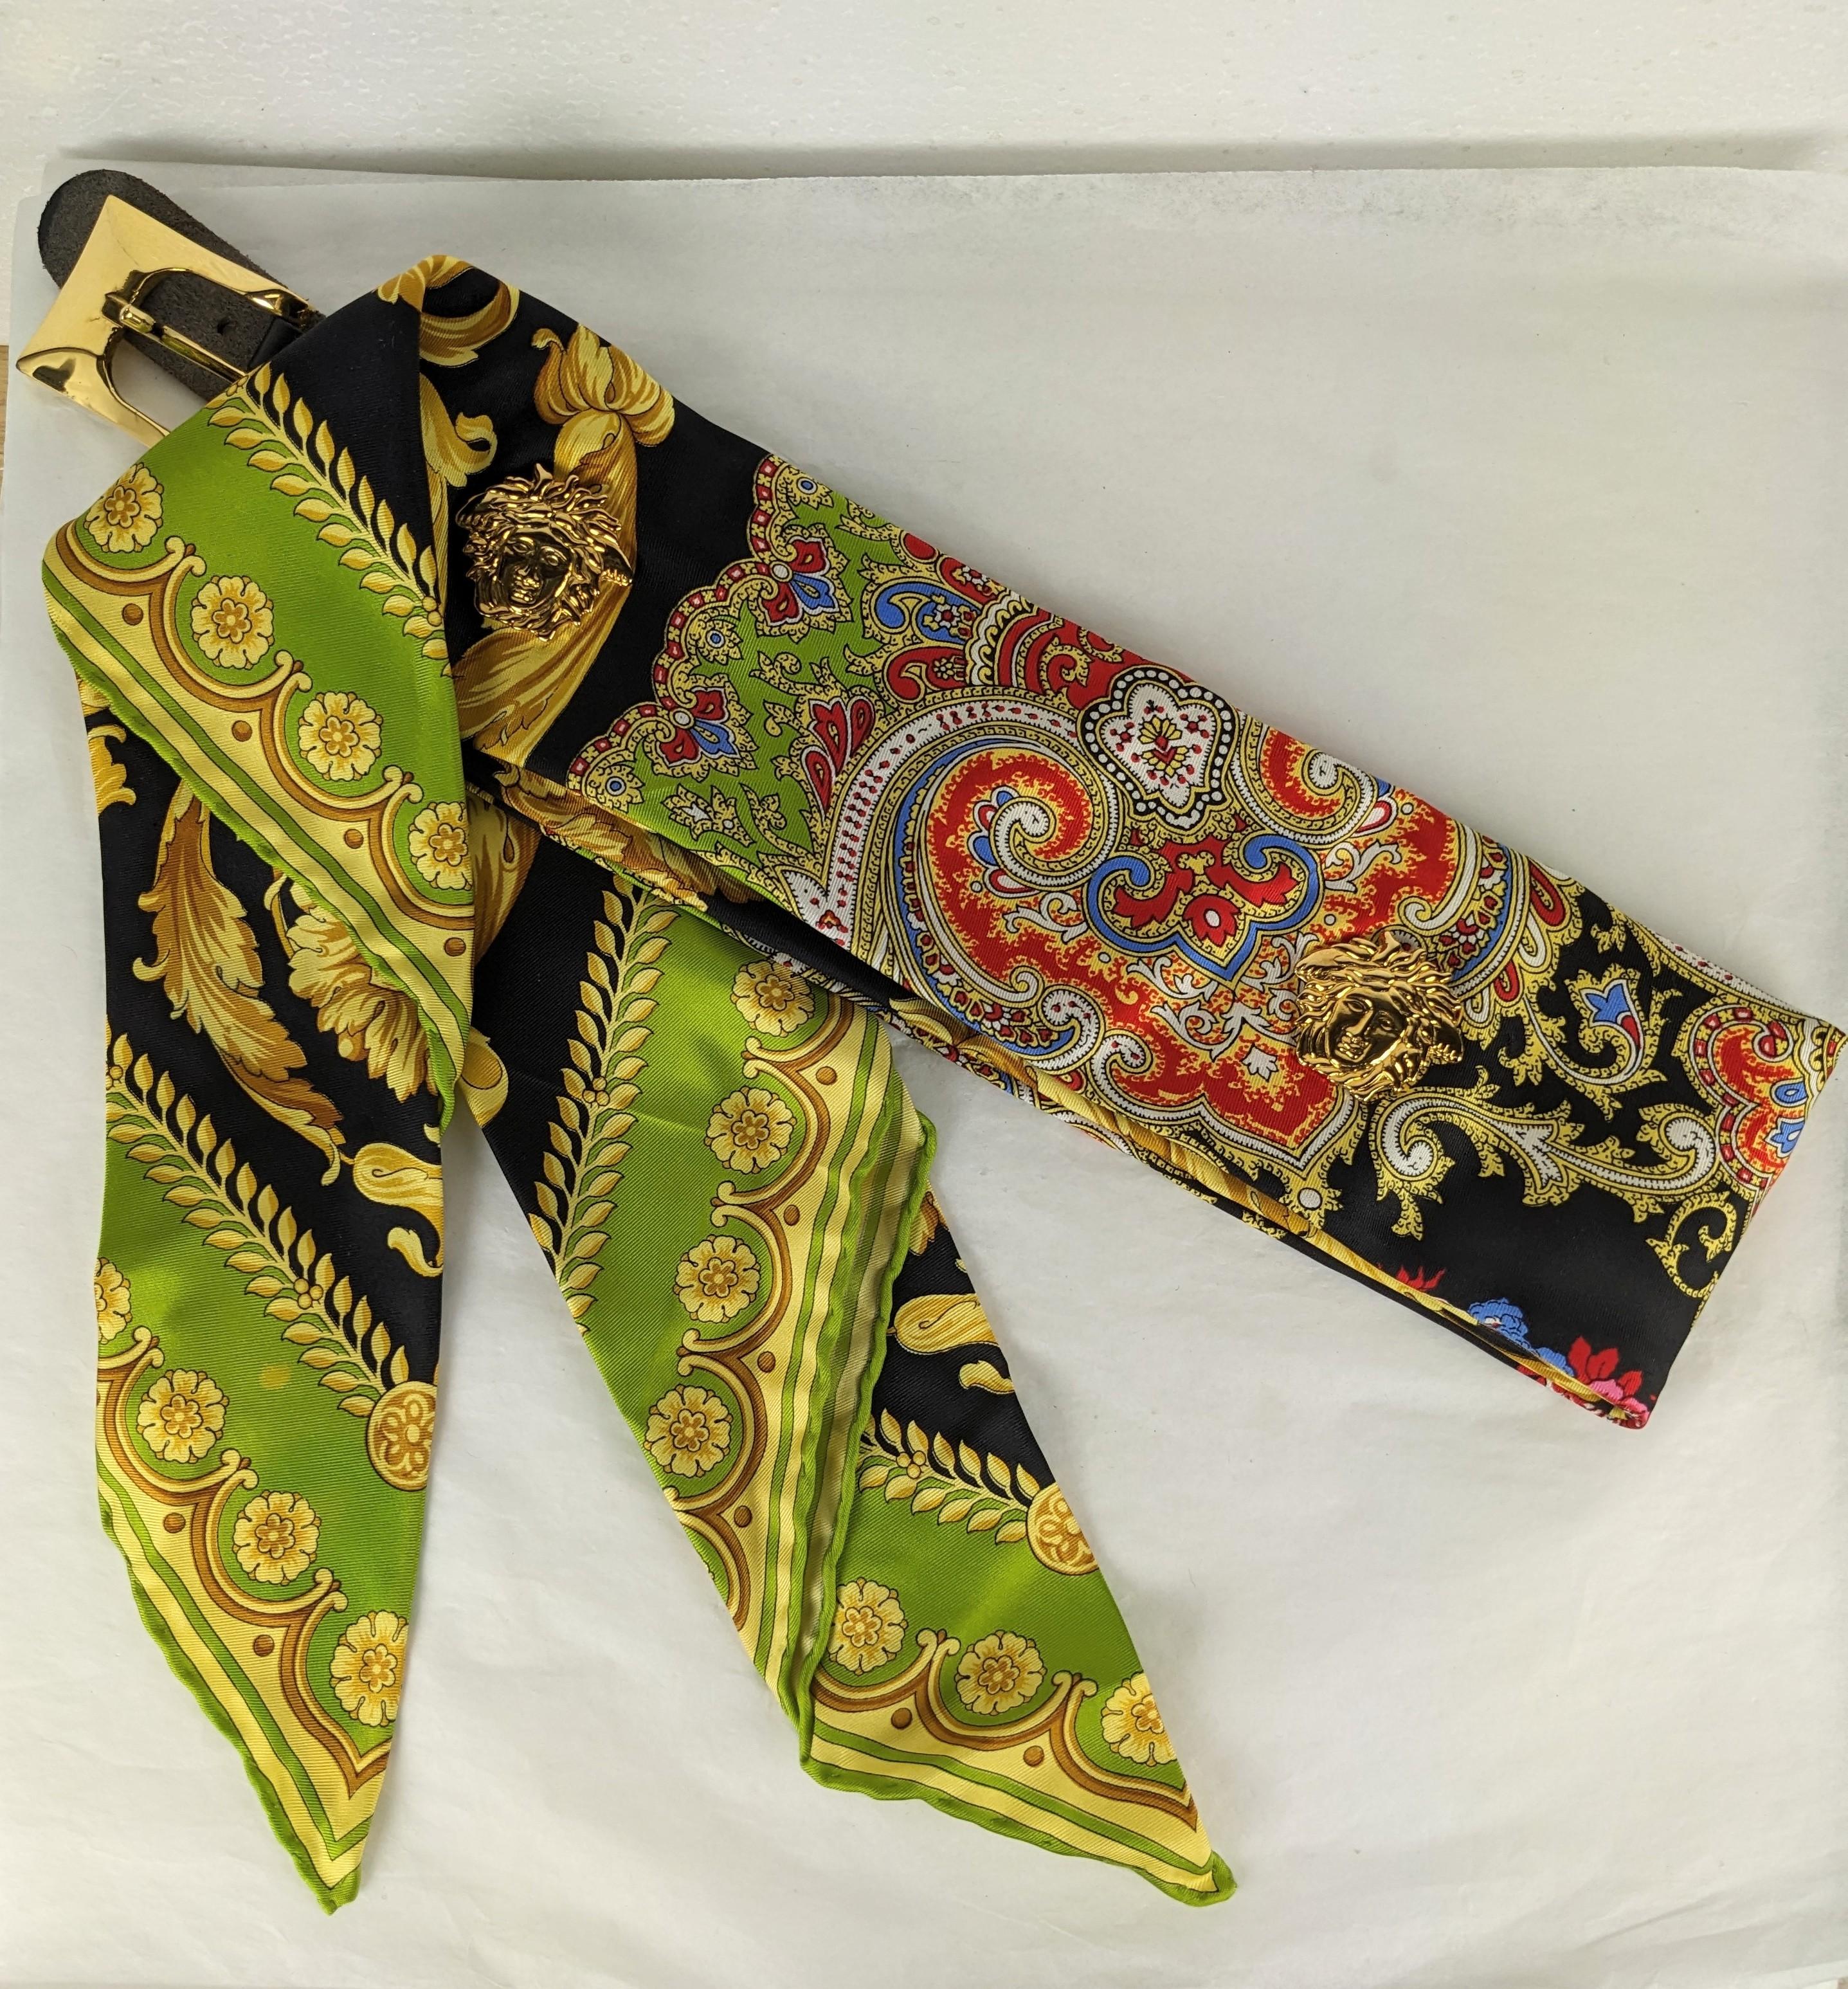 Gianni Versace Silk Scarf Belt In Excellent Condition For Sale In New York, NY